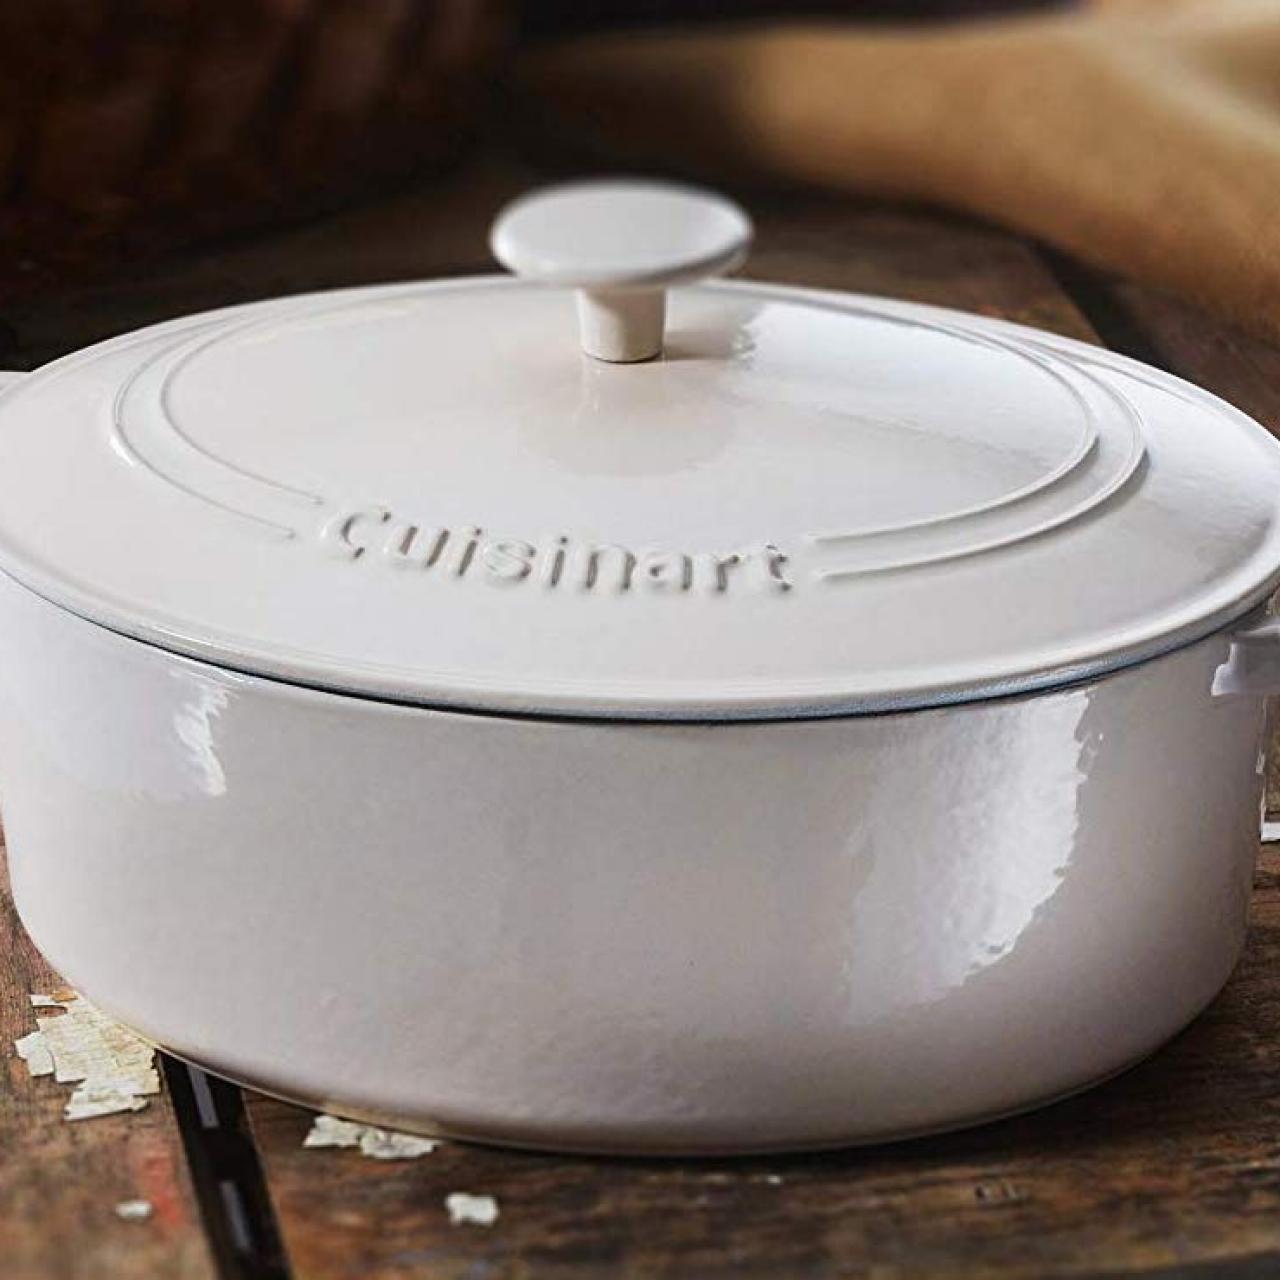 Cuisinart's 7-quart dutch oven is only $60 right now